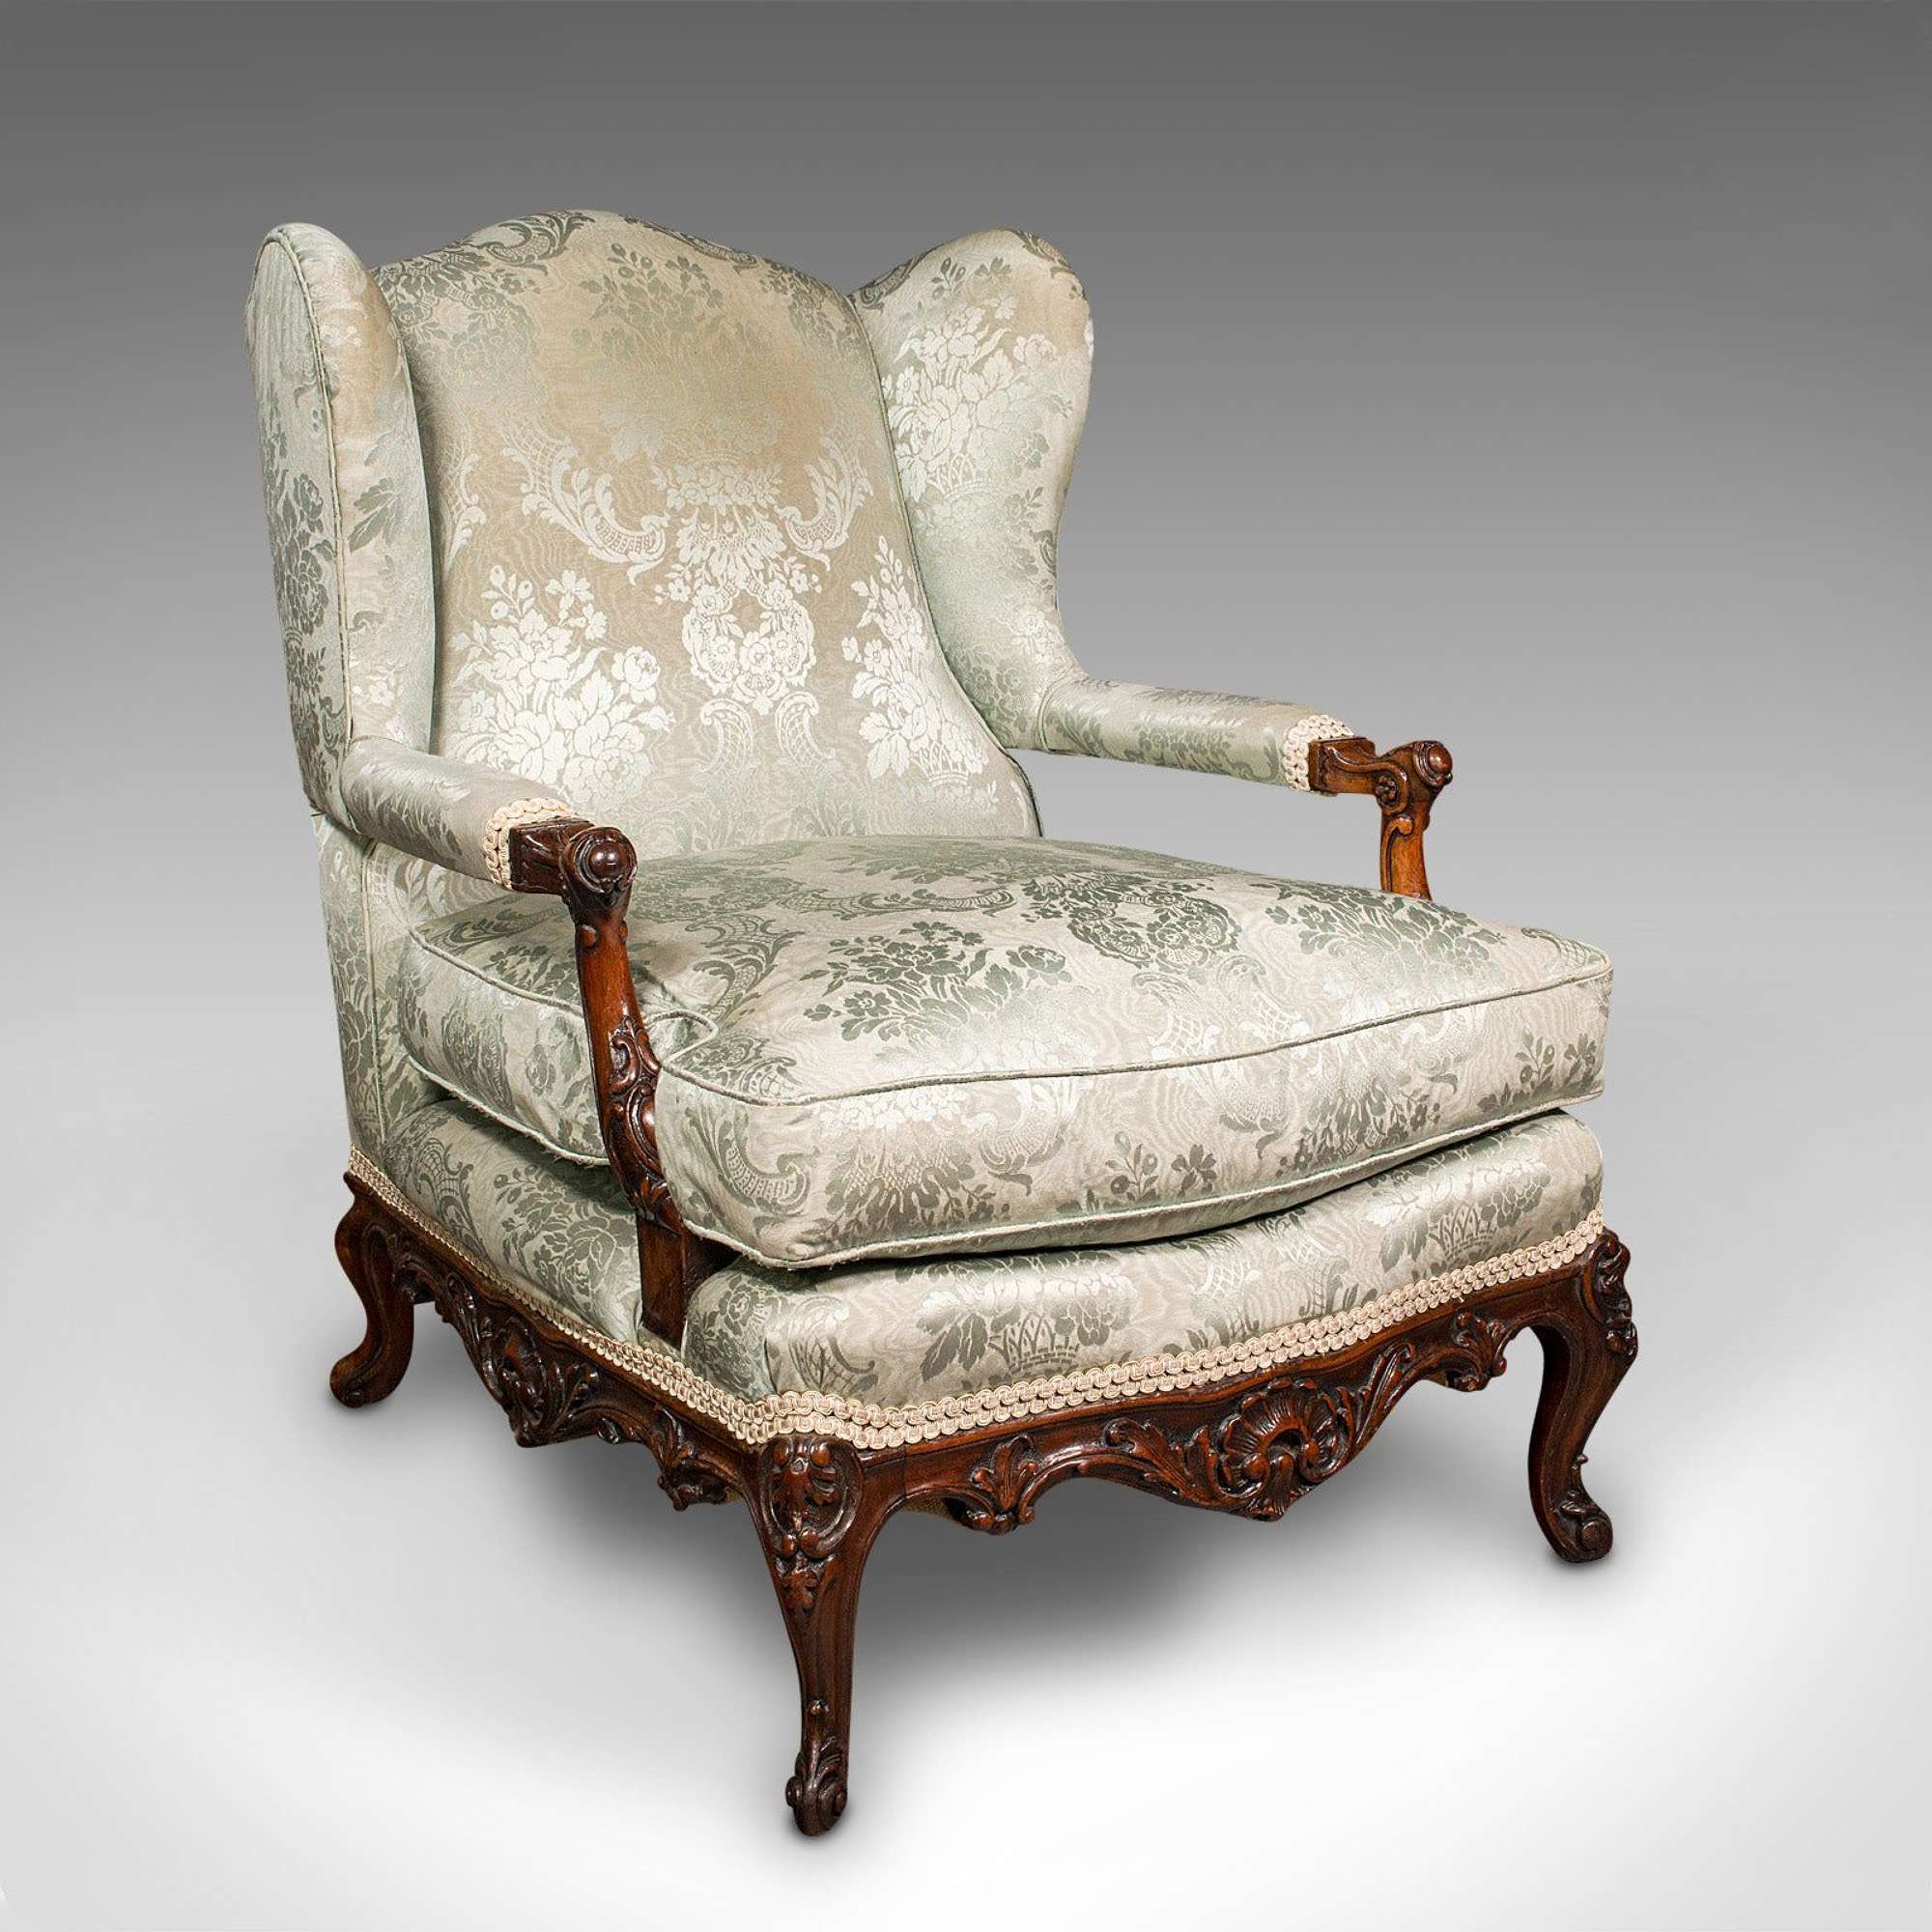 Antique Open Armchair, French, Walnut, Salon Chair, Damask Upholstery, Victorian